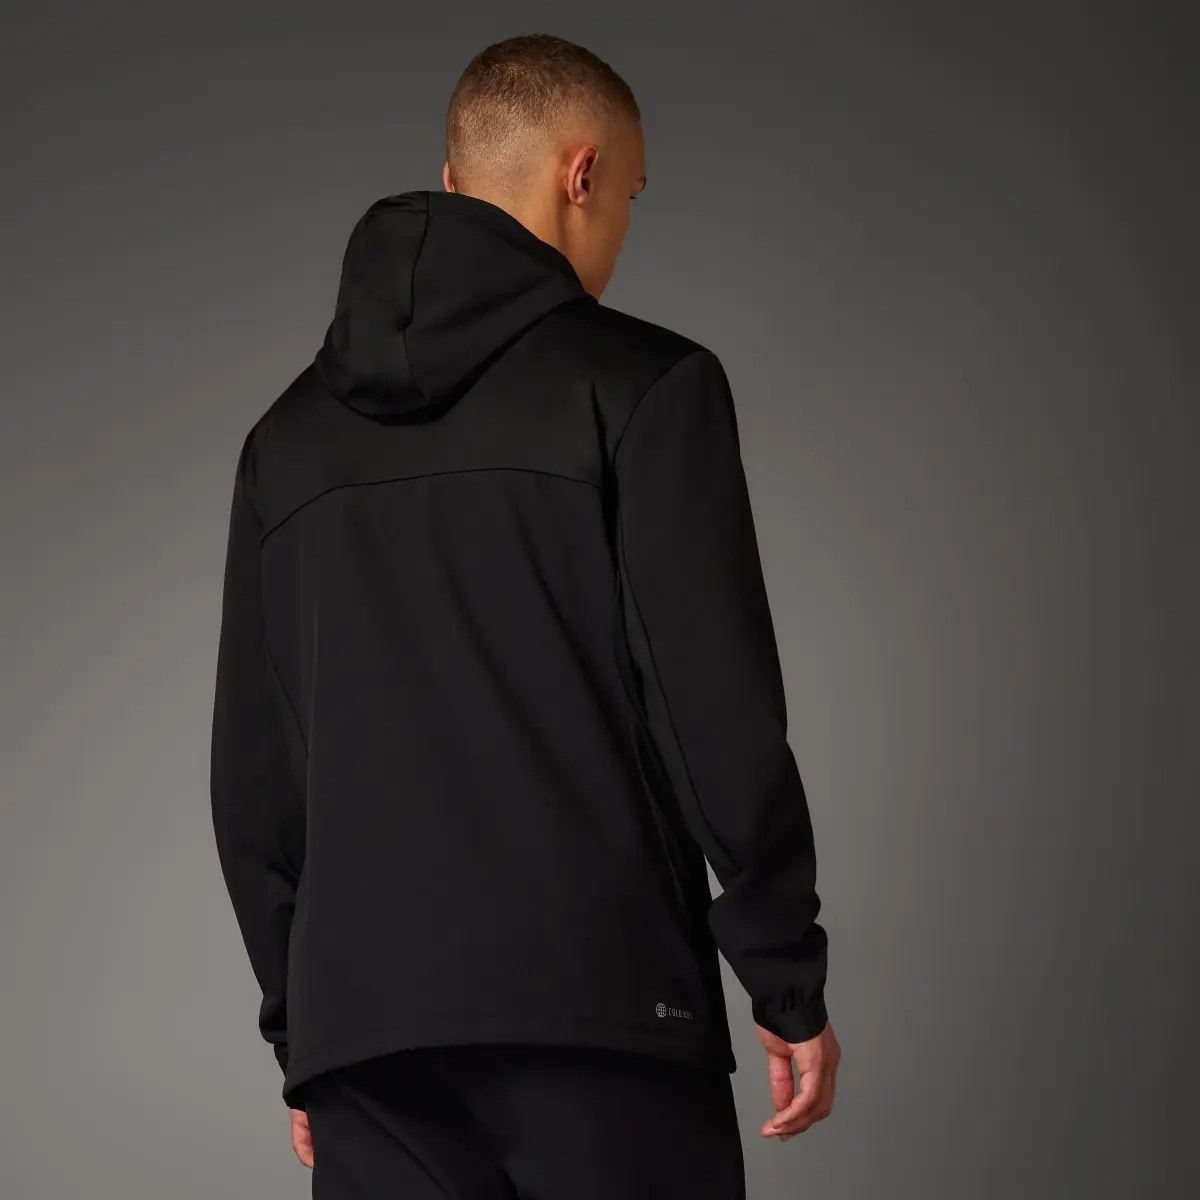 Adidas COLD.RDY Full-Zip Workout Hoodie. 2